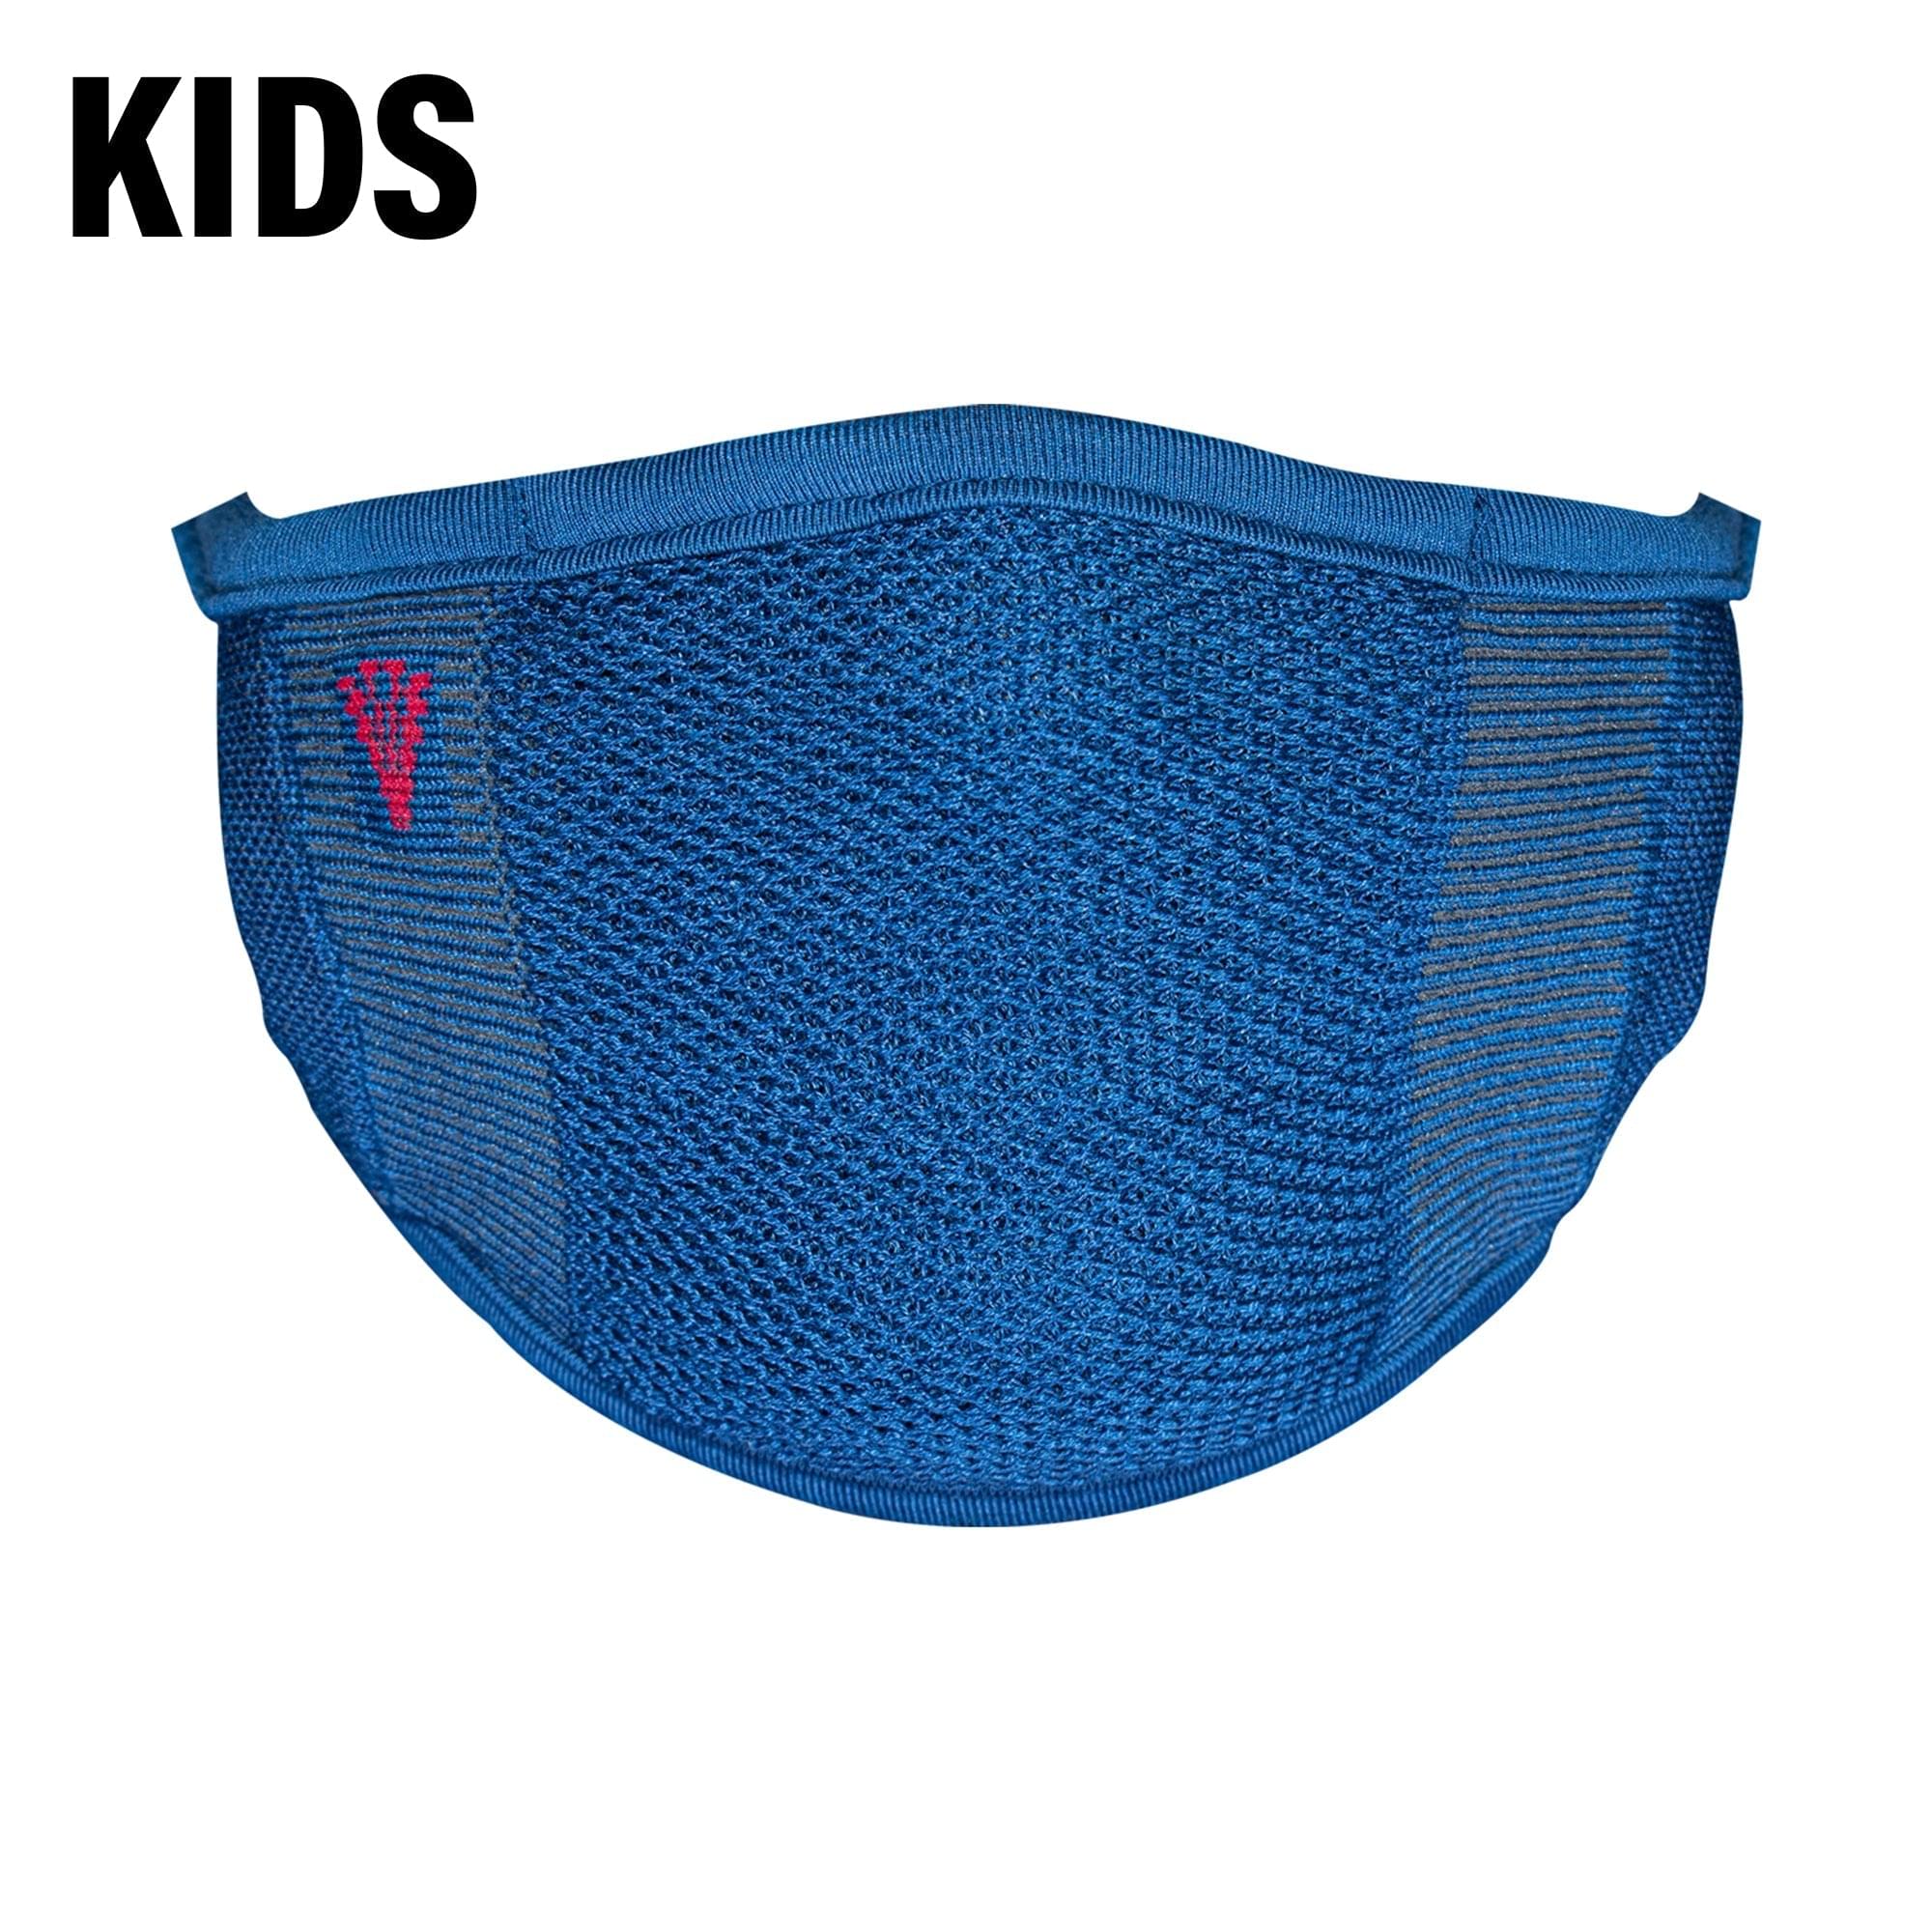 2-Layer Anti-Bacterial Protection Mask for Kids, Fashion Coloured -Size - Small (3-7 Yrs) - Pack of 1